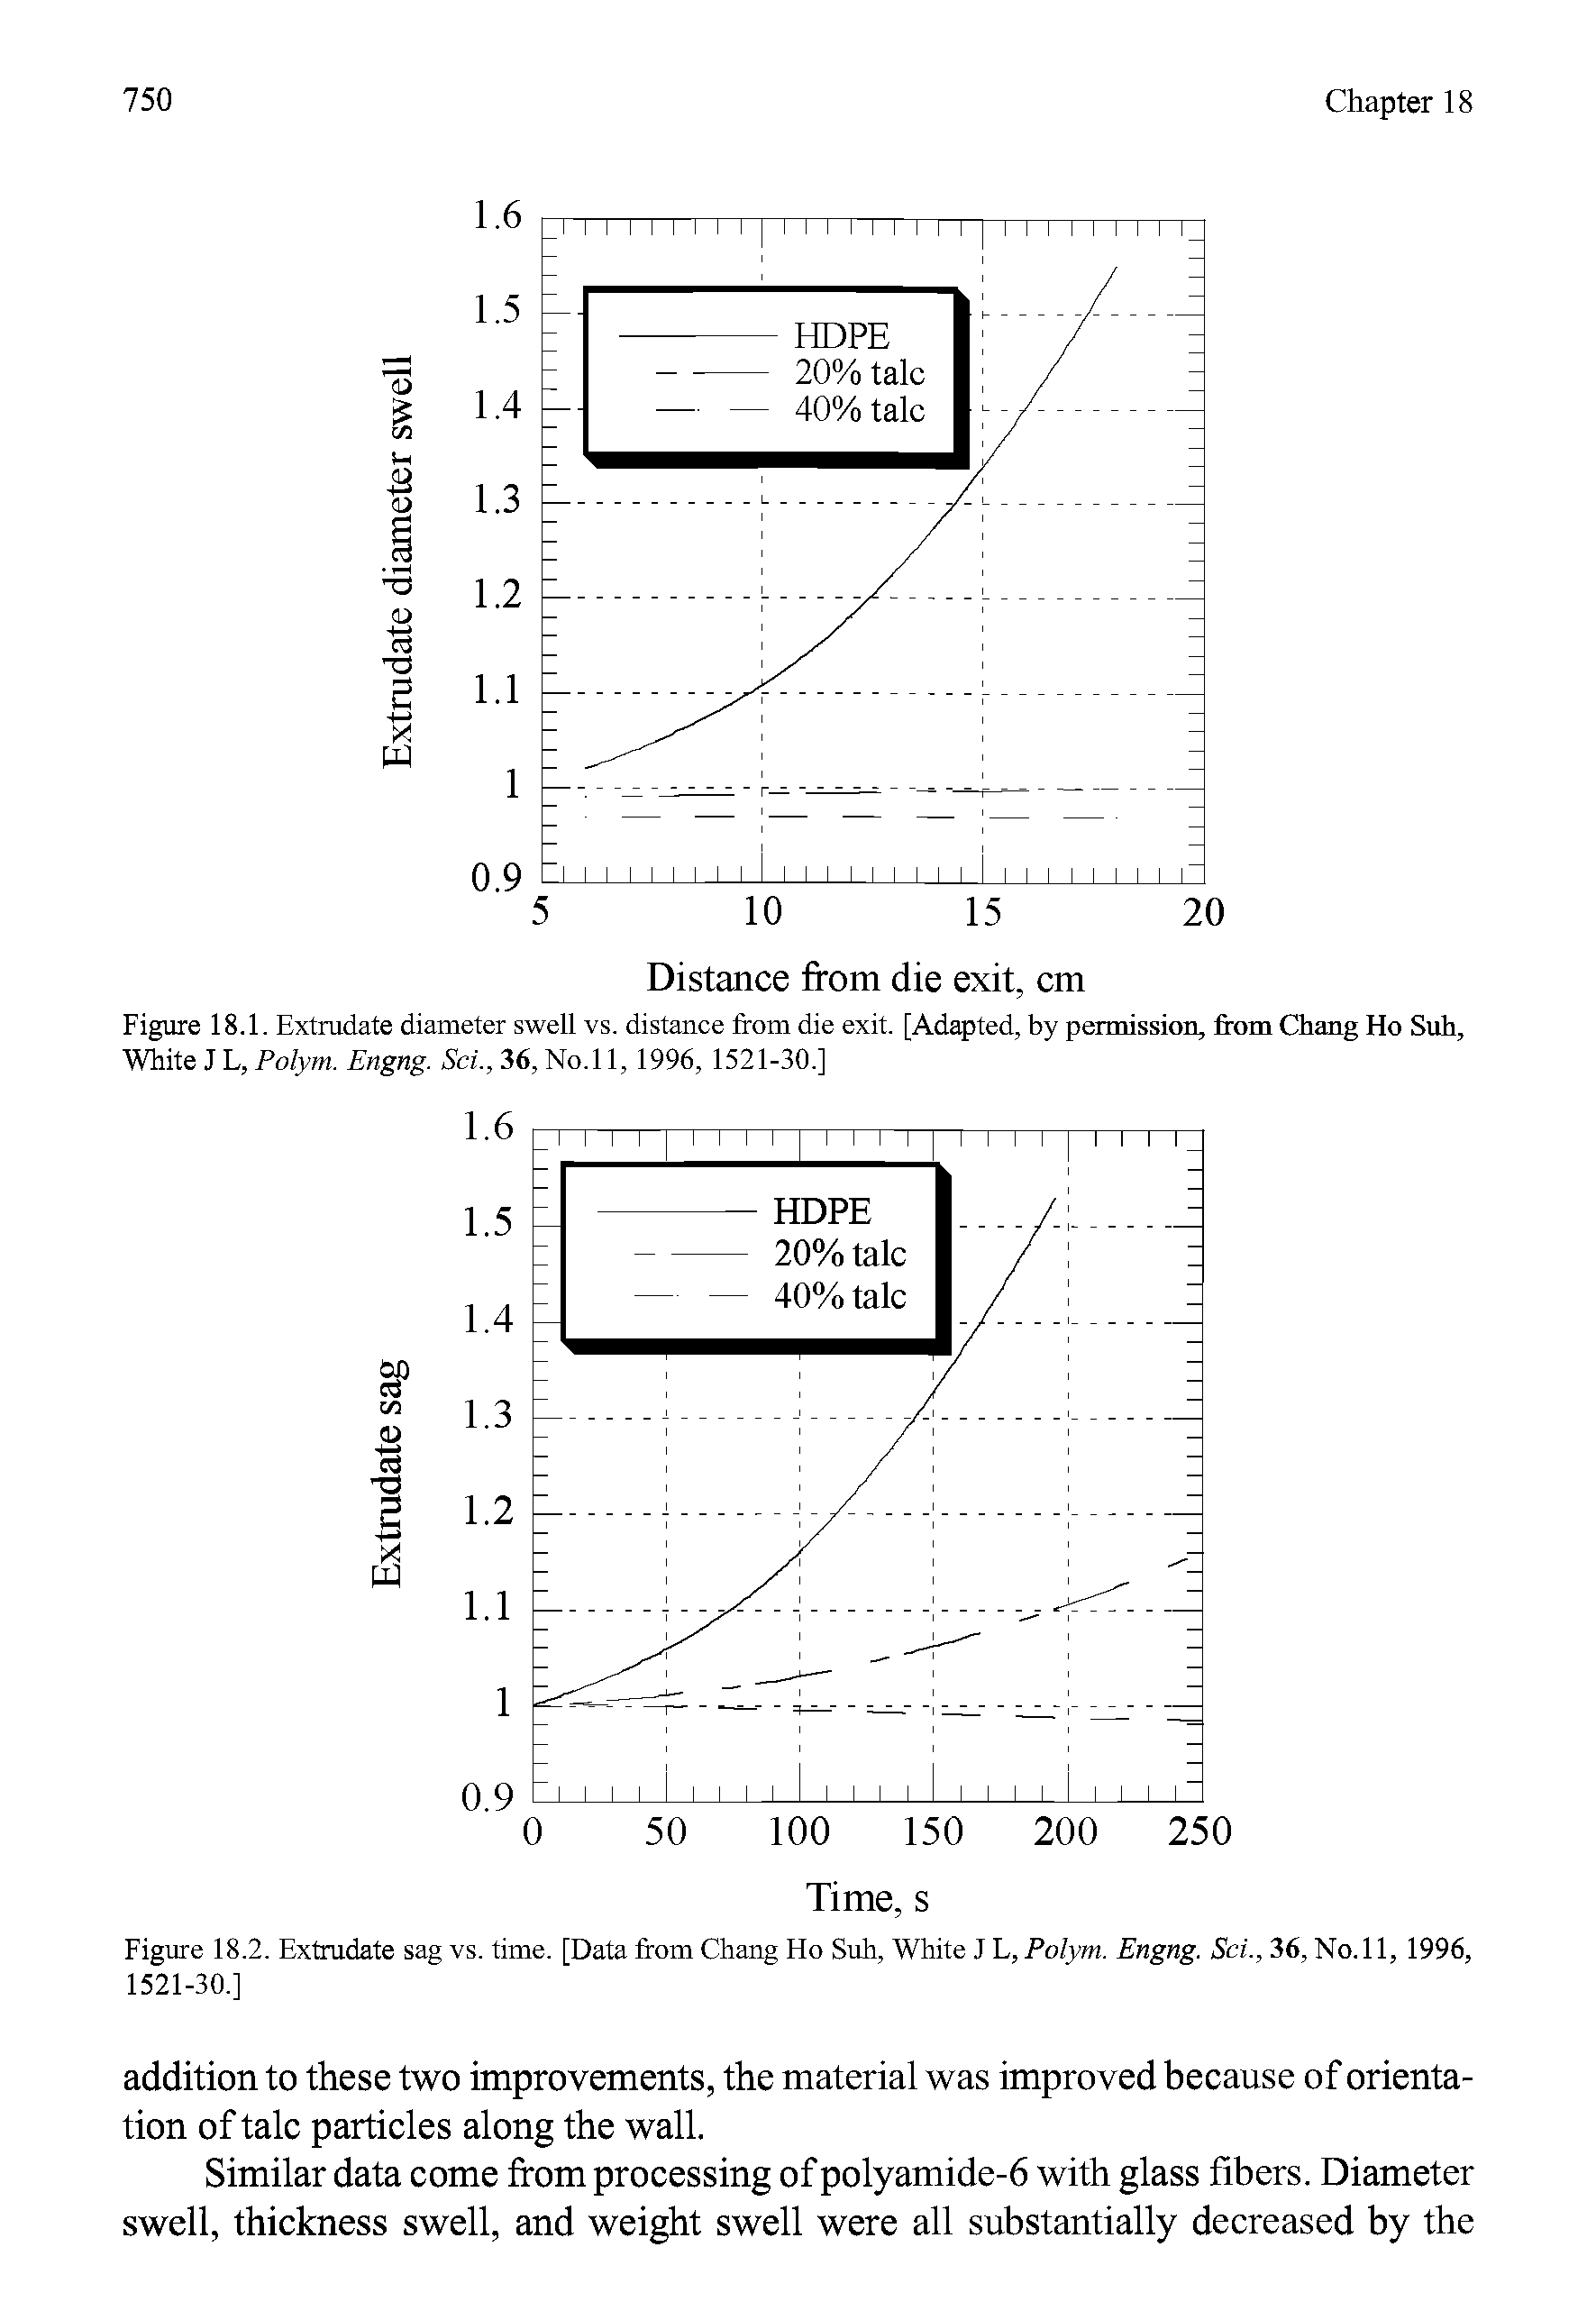 Figure 18.1. Extrudate diameter swell vs. distance from die exit. [Adapted, by permission, from Chang Ho Suh, White J L, Polym. Engng. Sei., 36, No.l 1, 1996, 1521-30.]...